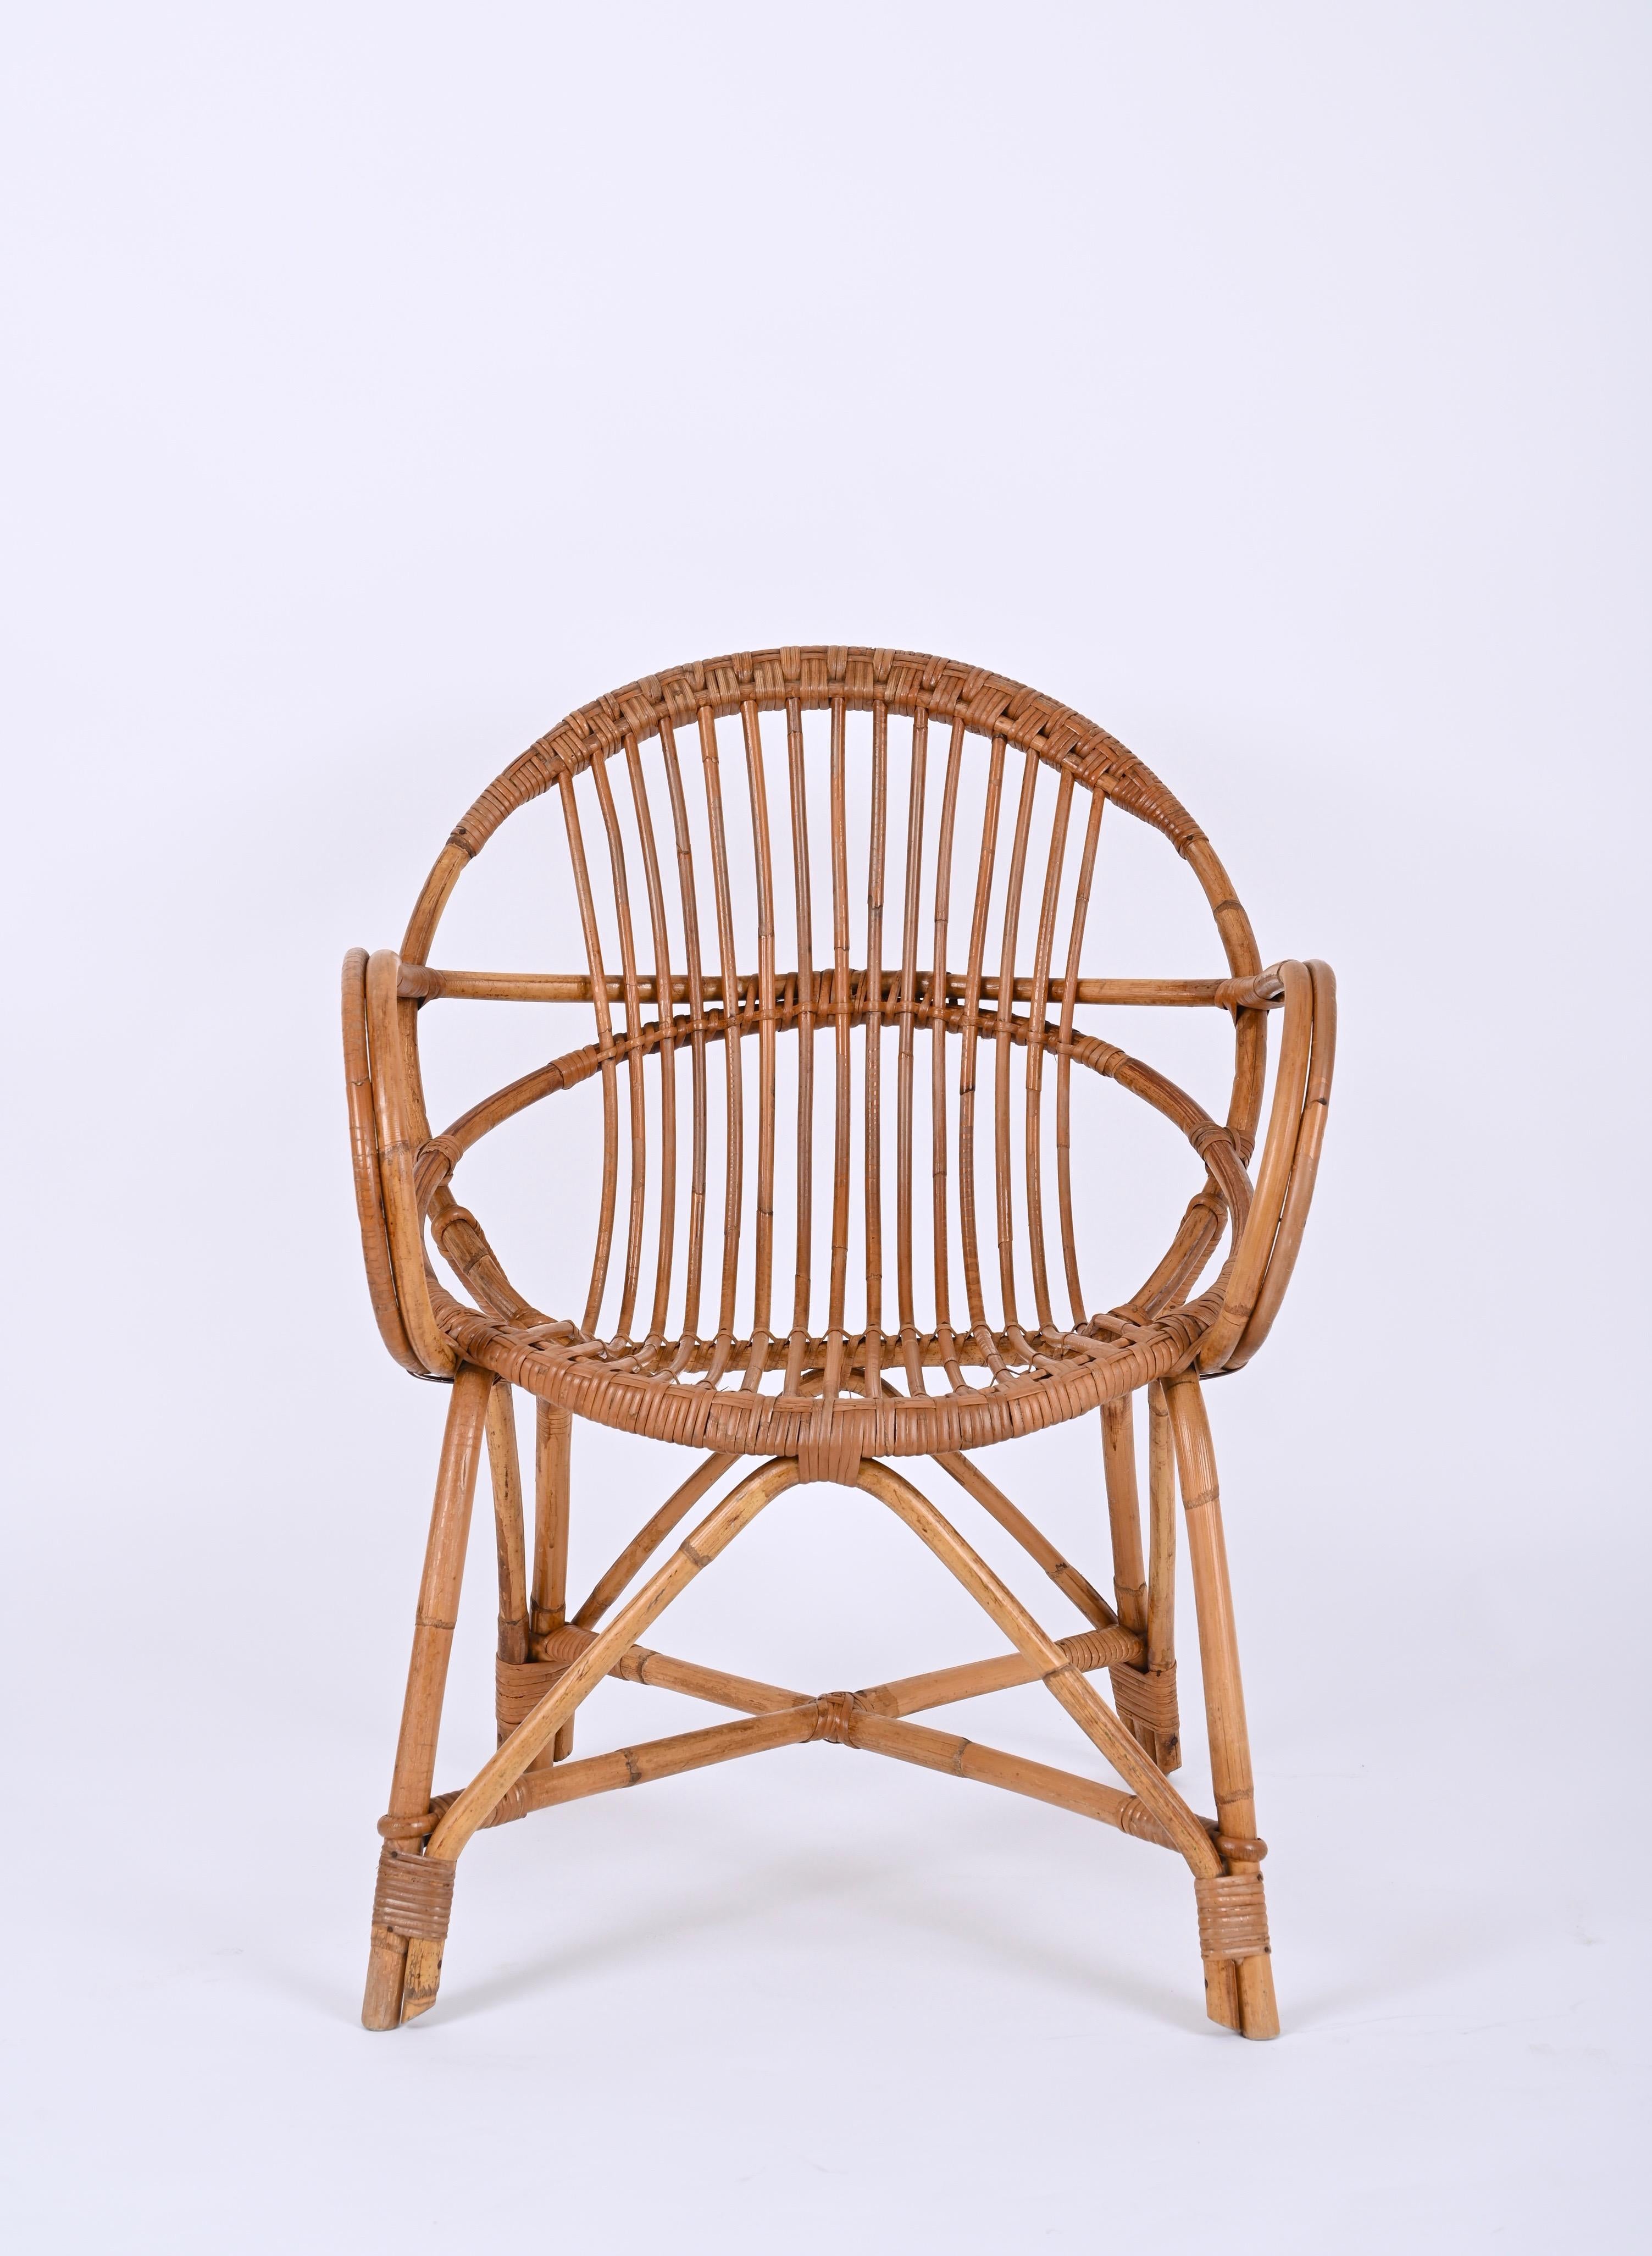 Midcentury Franco Albini Rattan and Bamboo Shell-Shaped Armchair, Italy, 1950s For Sale 6